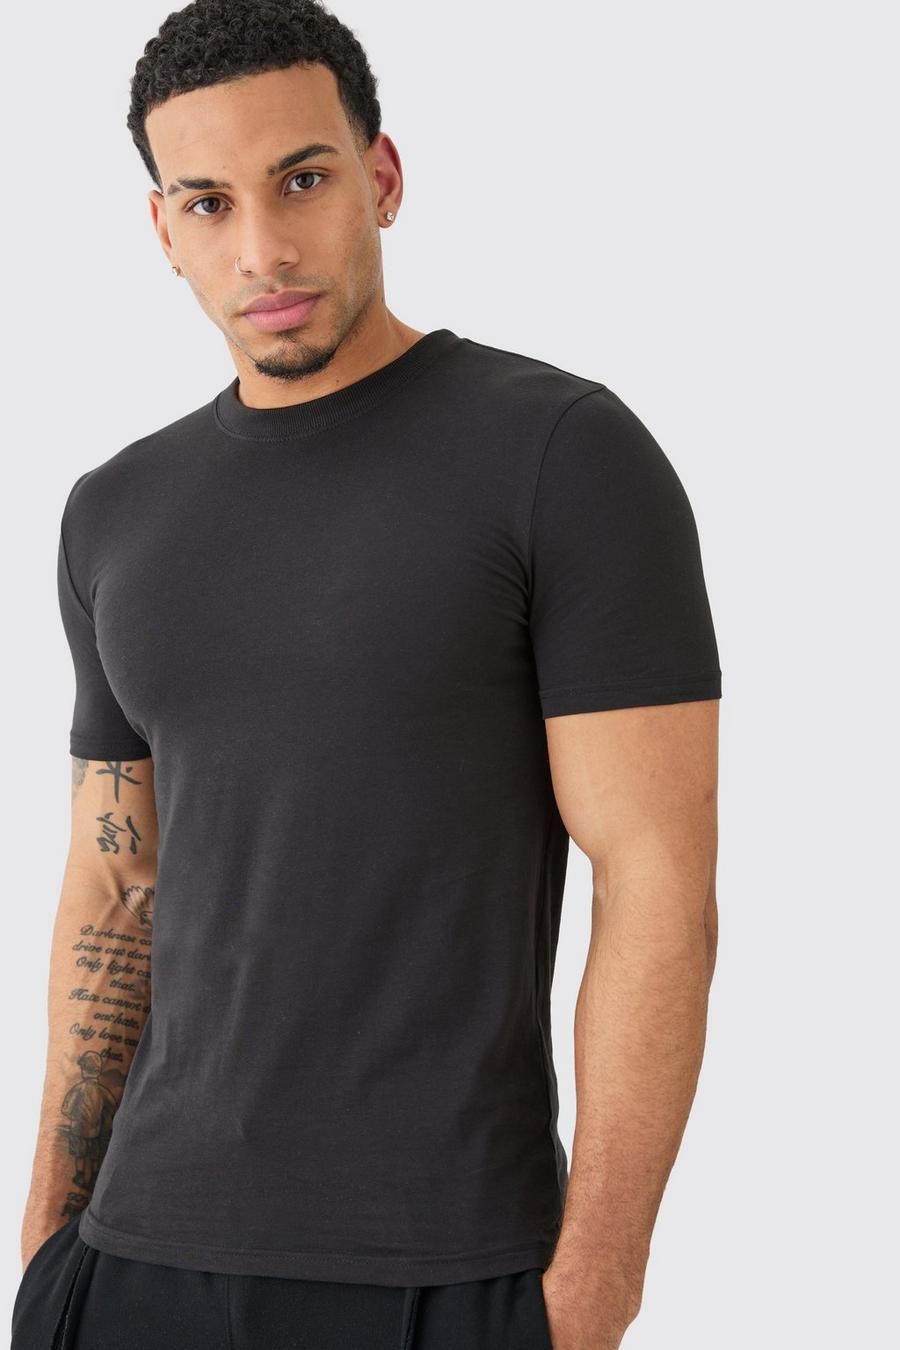 Black Muscle Fit T-shirt image number 1